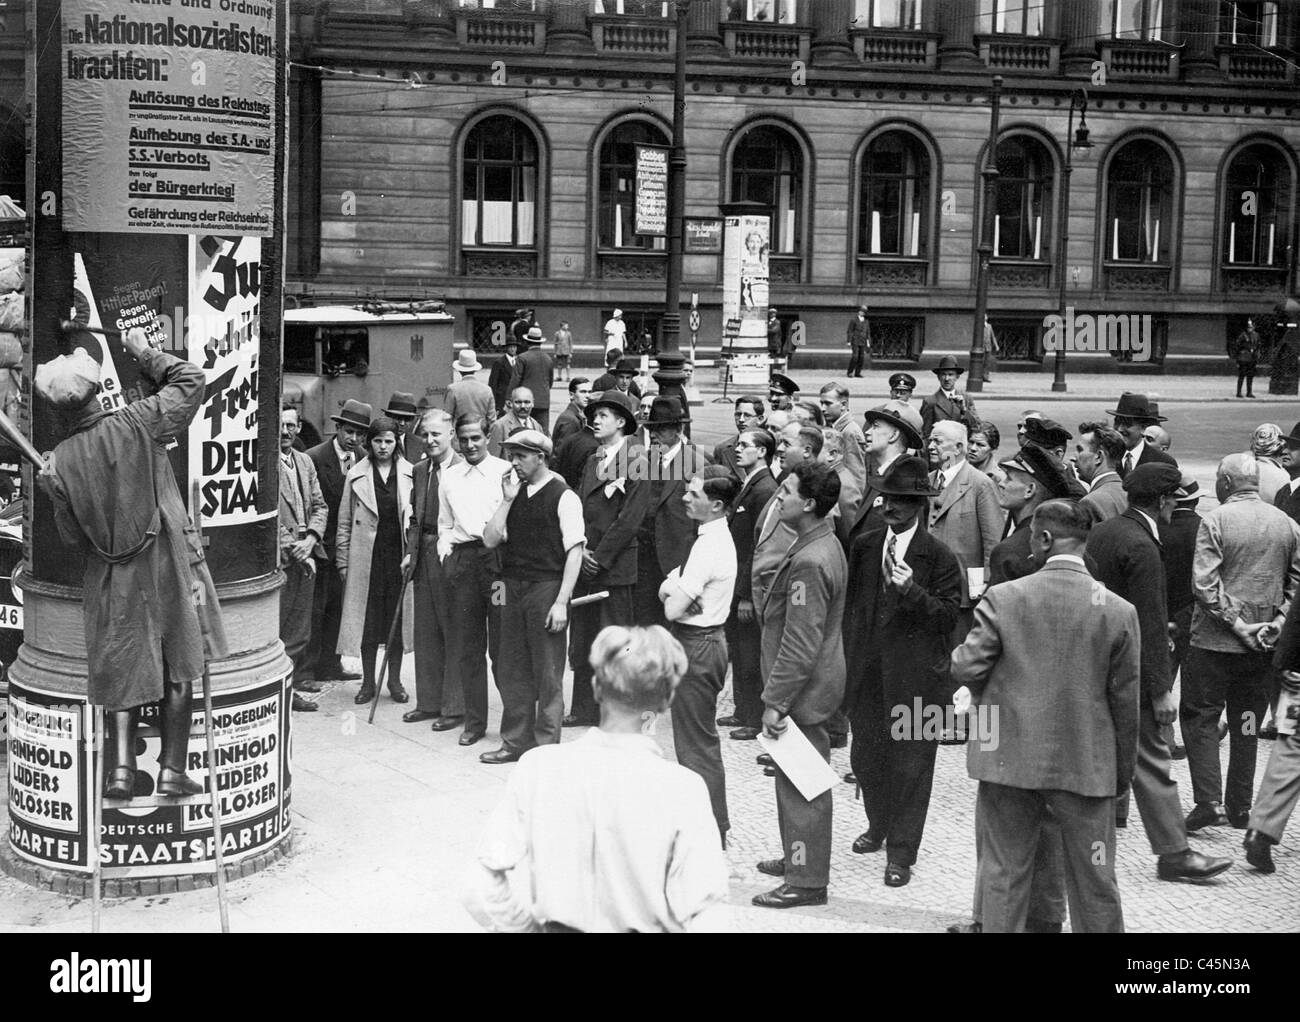 Pedestrians in front of advertising pillar with electoral advertisement, 1932 Stock Photo